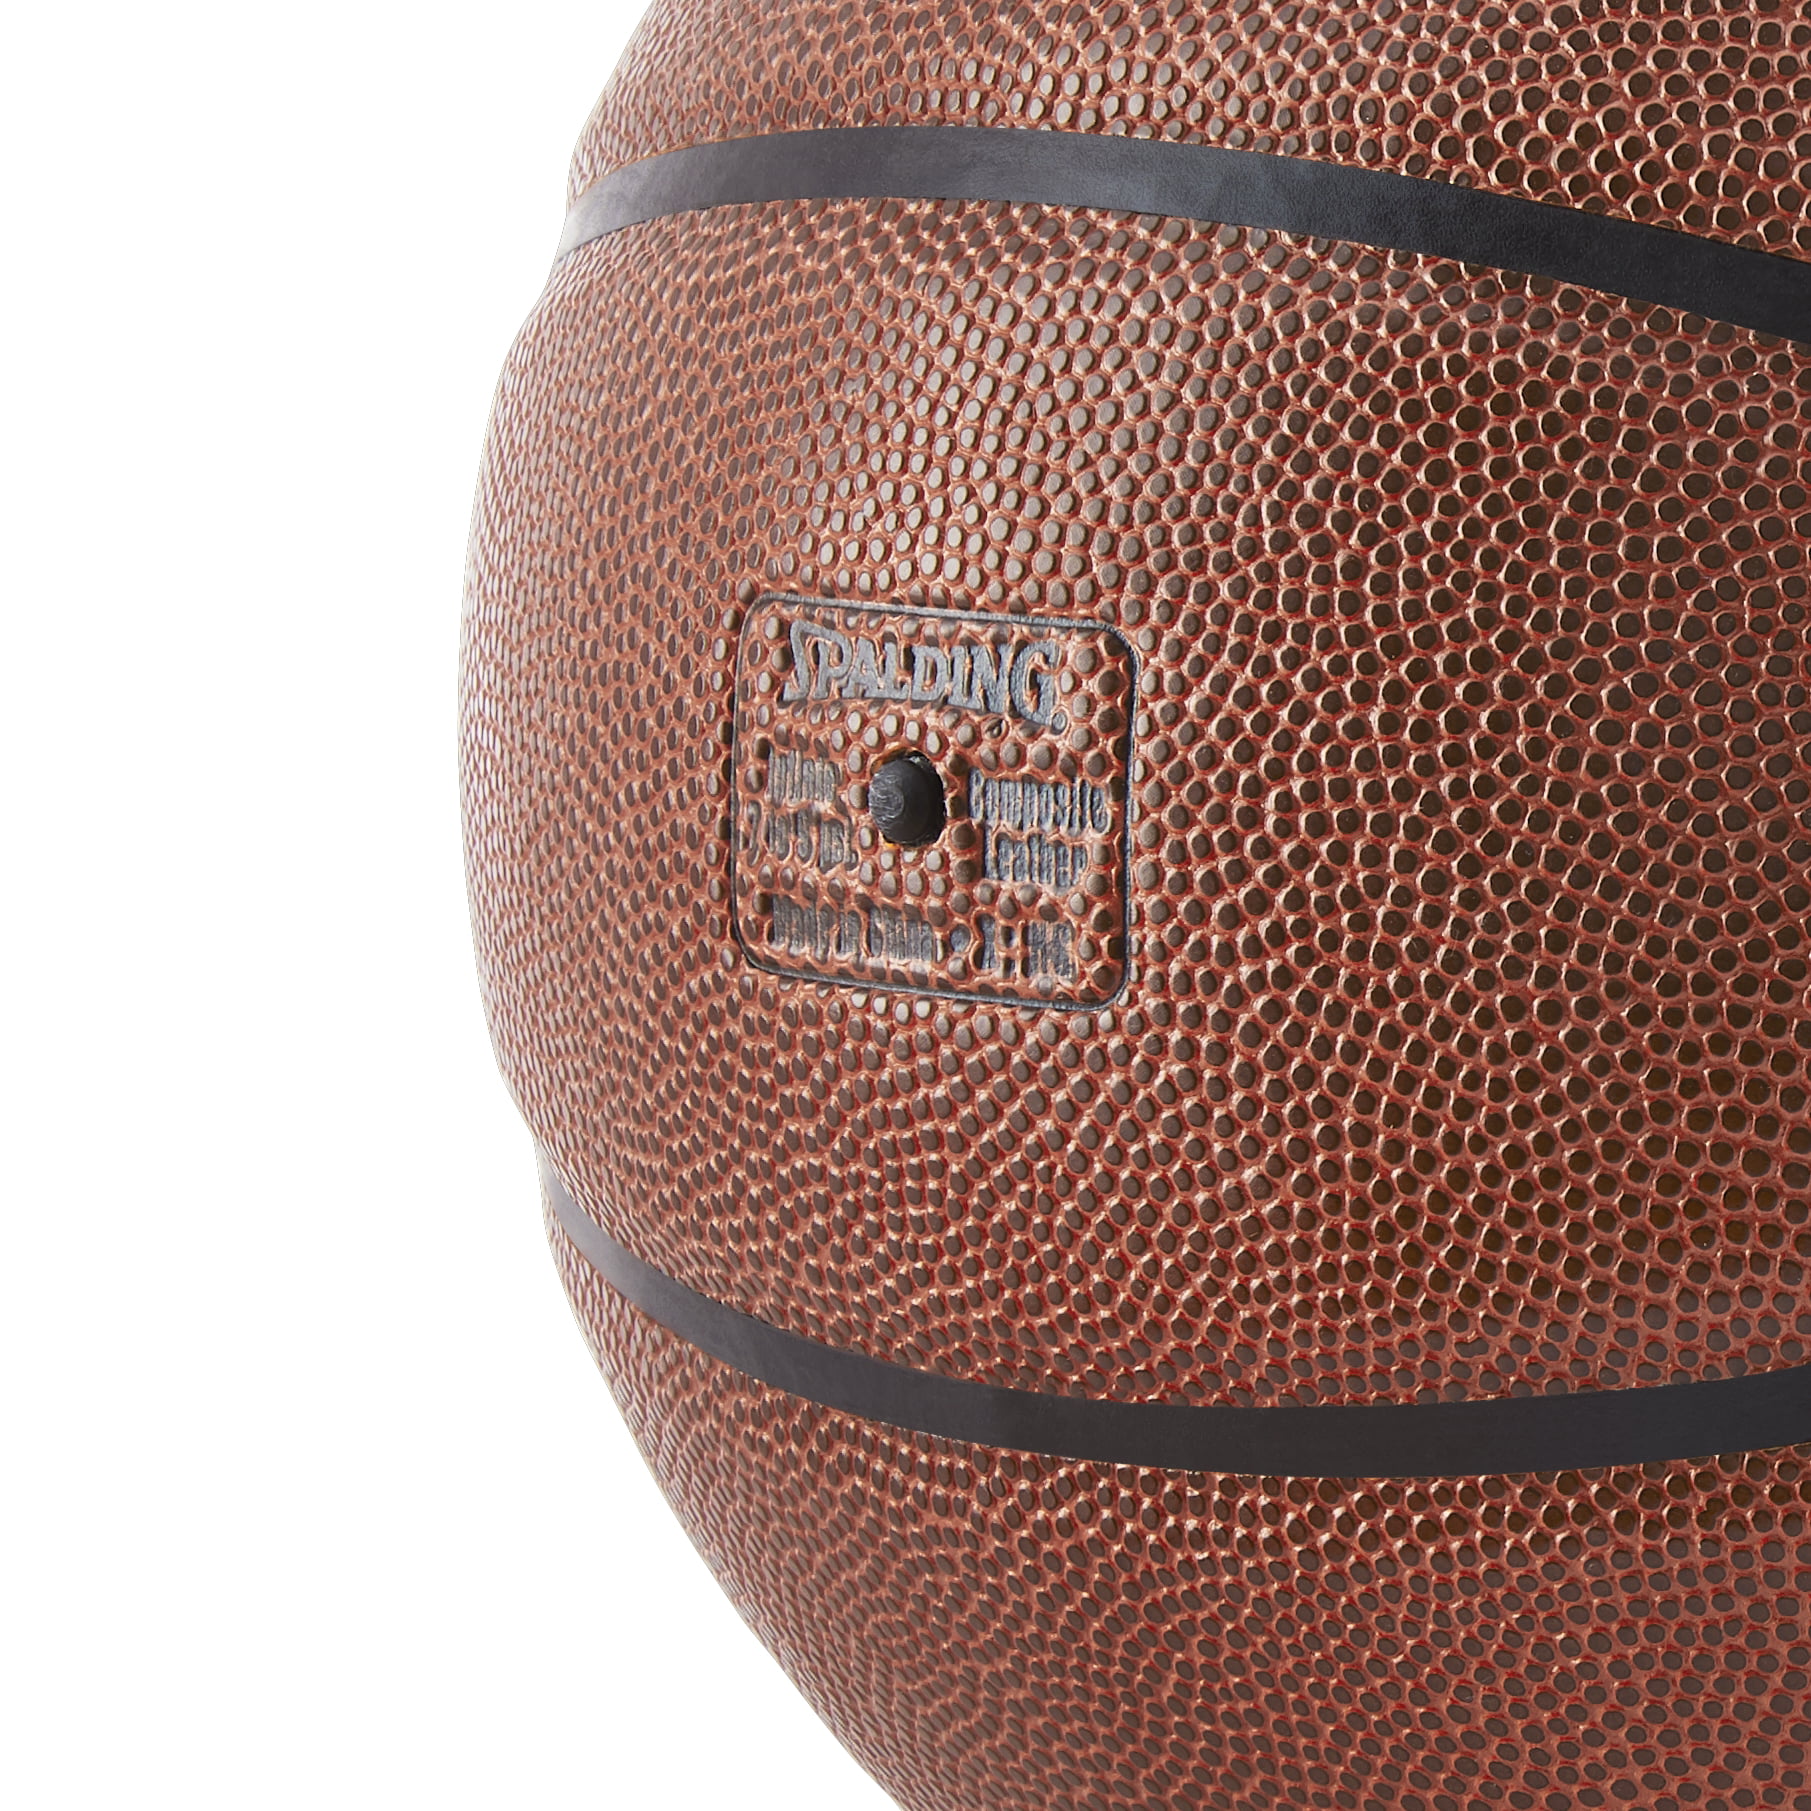 Basketball Indoor and Outdoor Sports Fun Games Moisture Absorbing Ball Brown New 